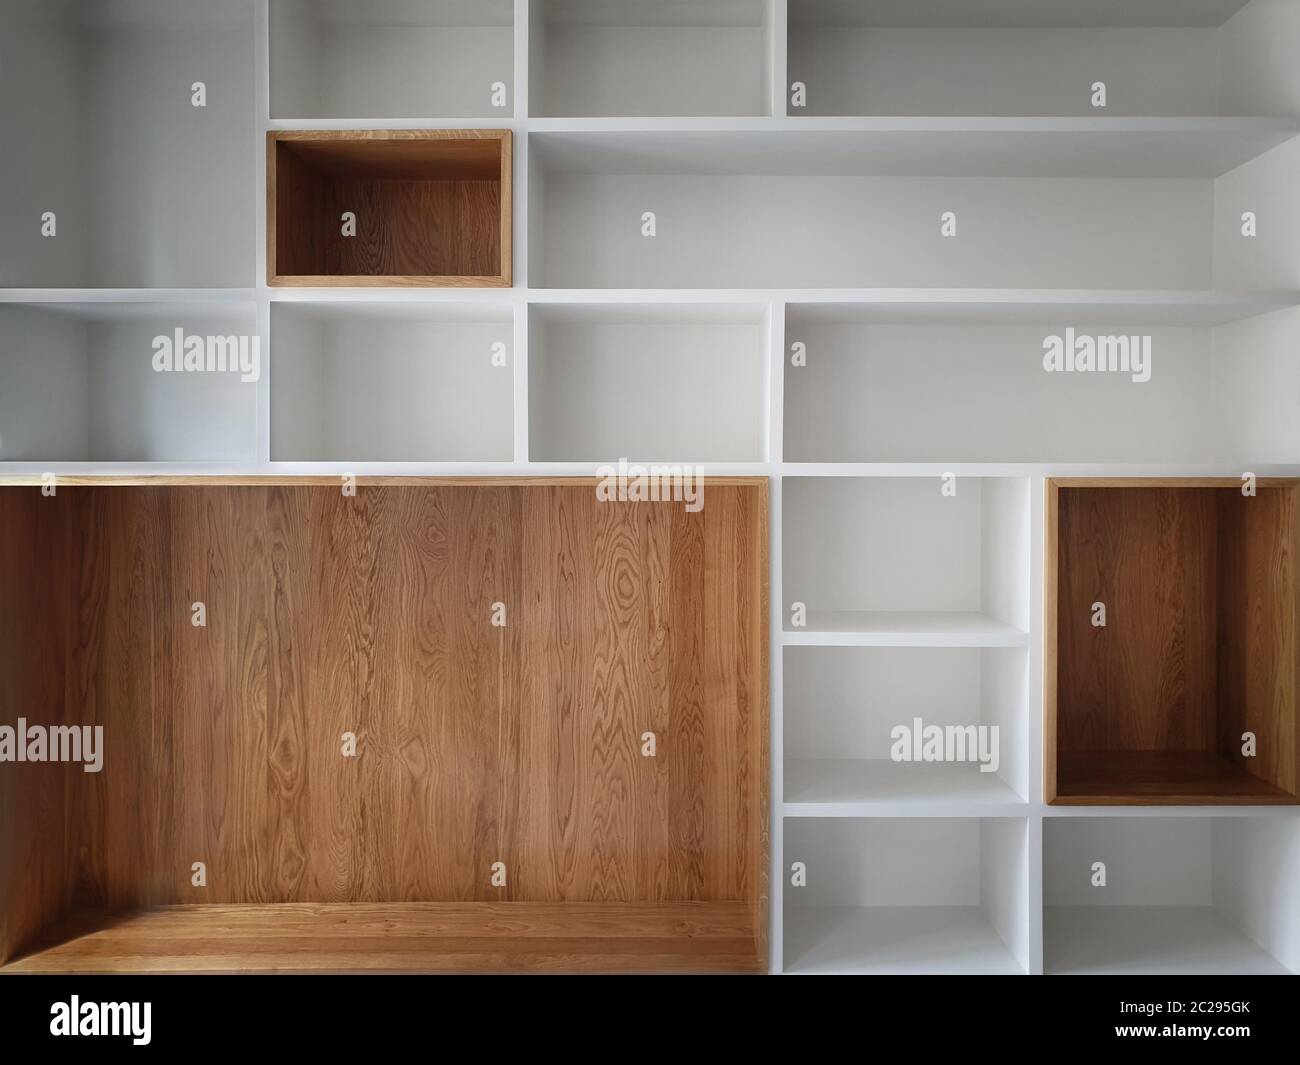 Empty closet shelves background. Modern wooden wardrobe boxes, beautiful  white and brown interior design combination, abstract shape and patterns  Stock Photo - Alamy